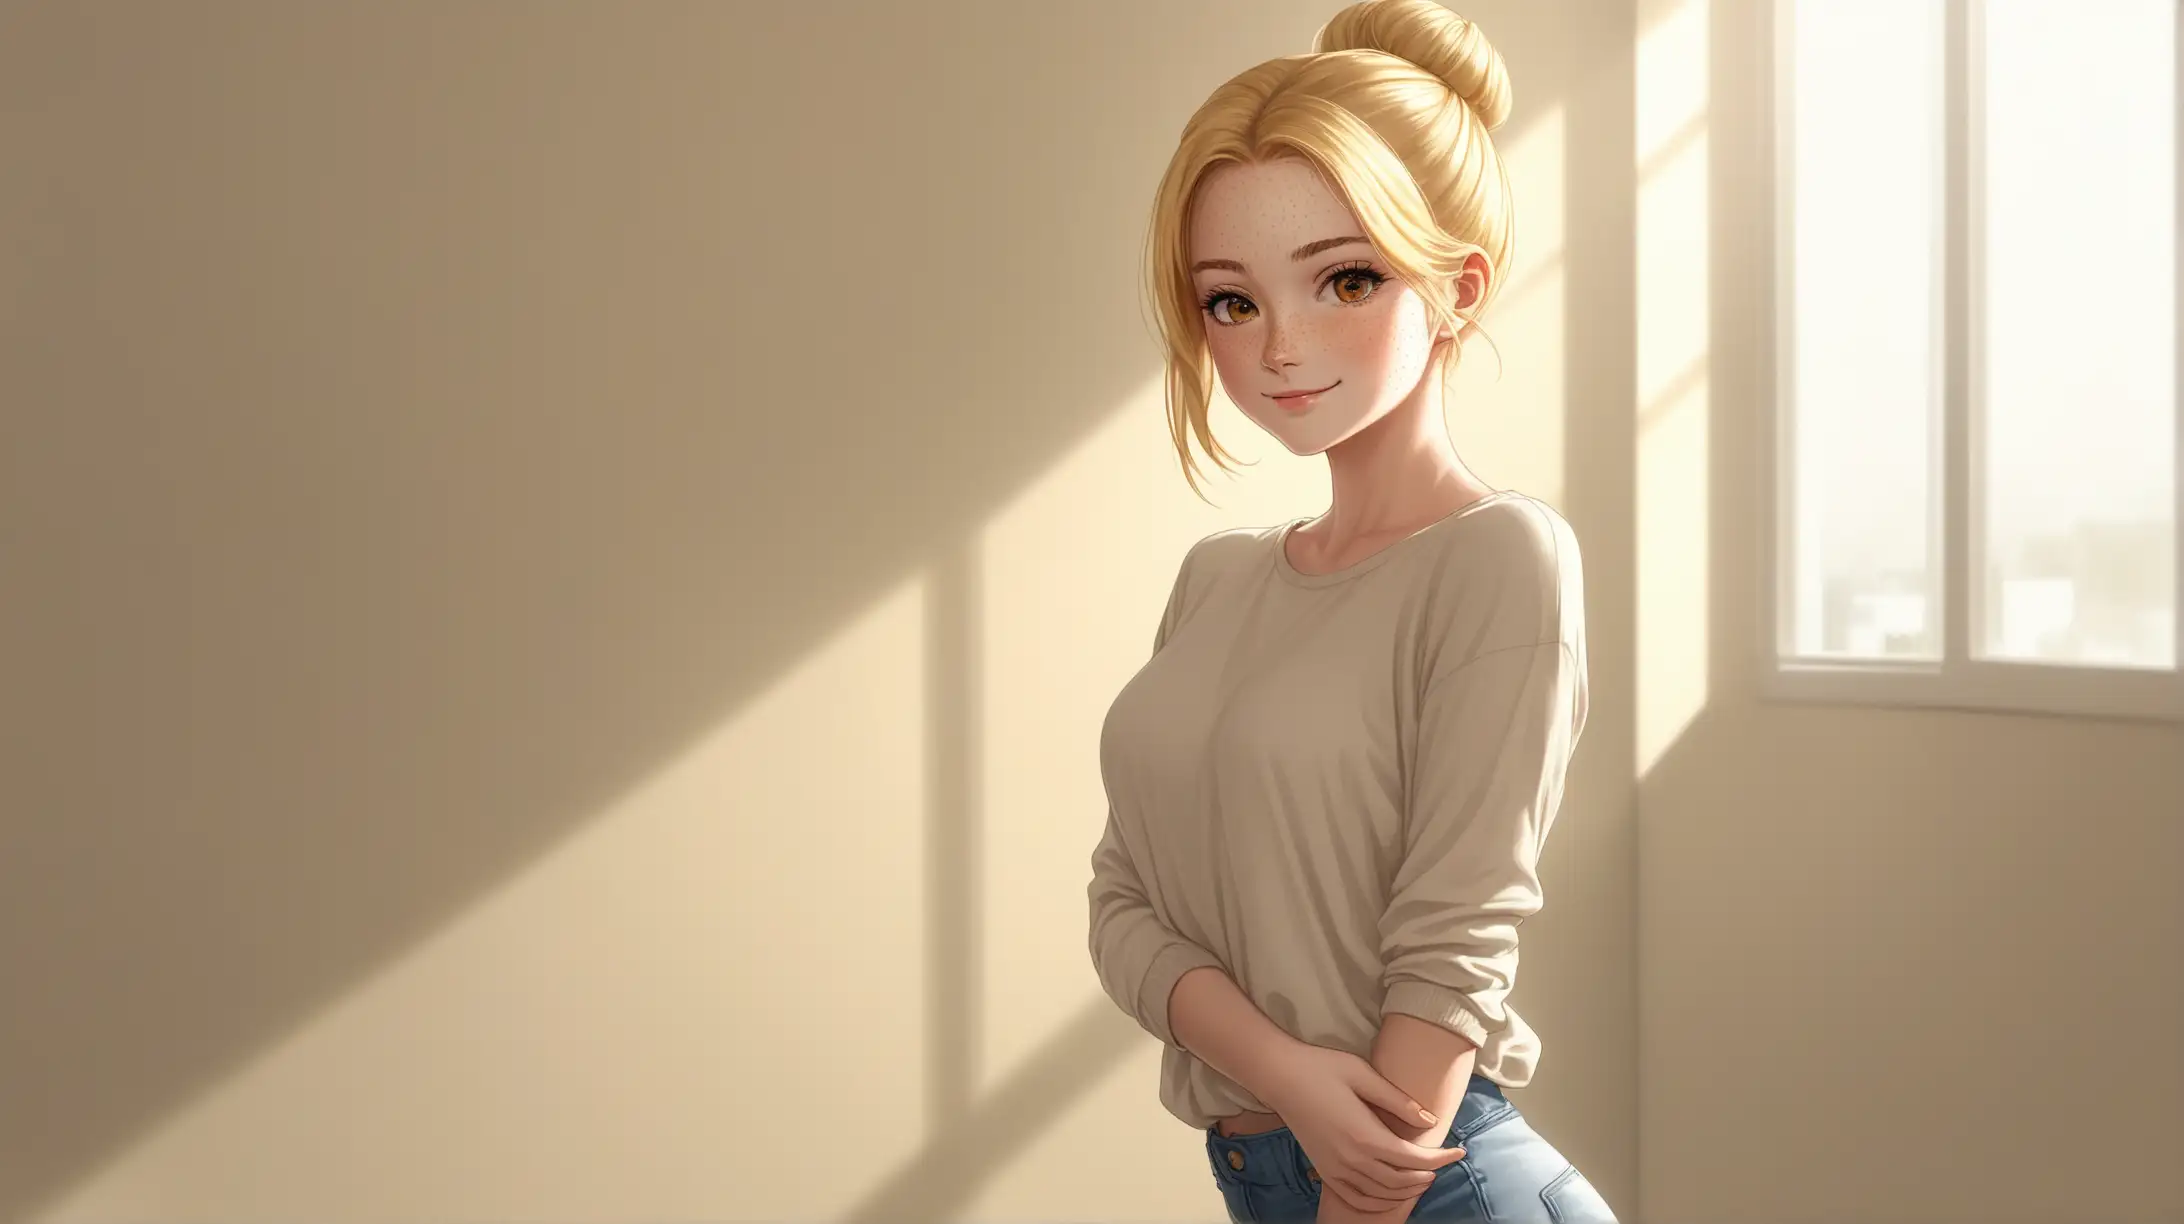 Draw a young woman, long blonde hair in a bun, gold eyes, freckles, perky figure,
casual outfit, high quality, long shot, indoors, seductive pose, natural lighting, smiling